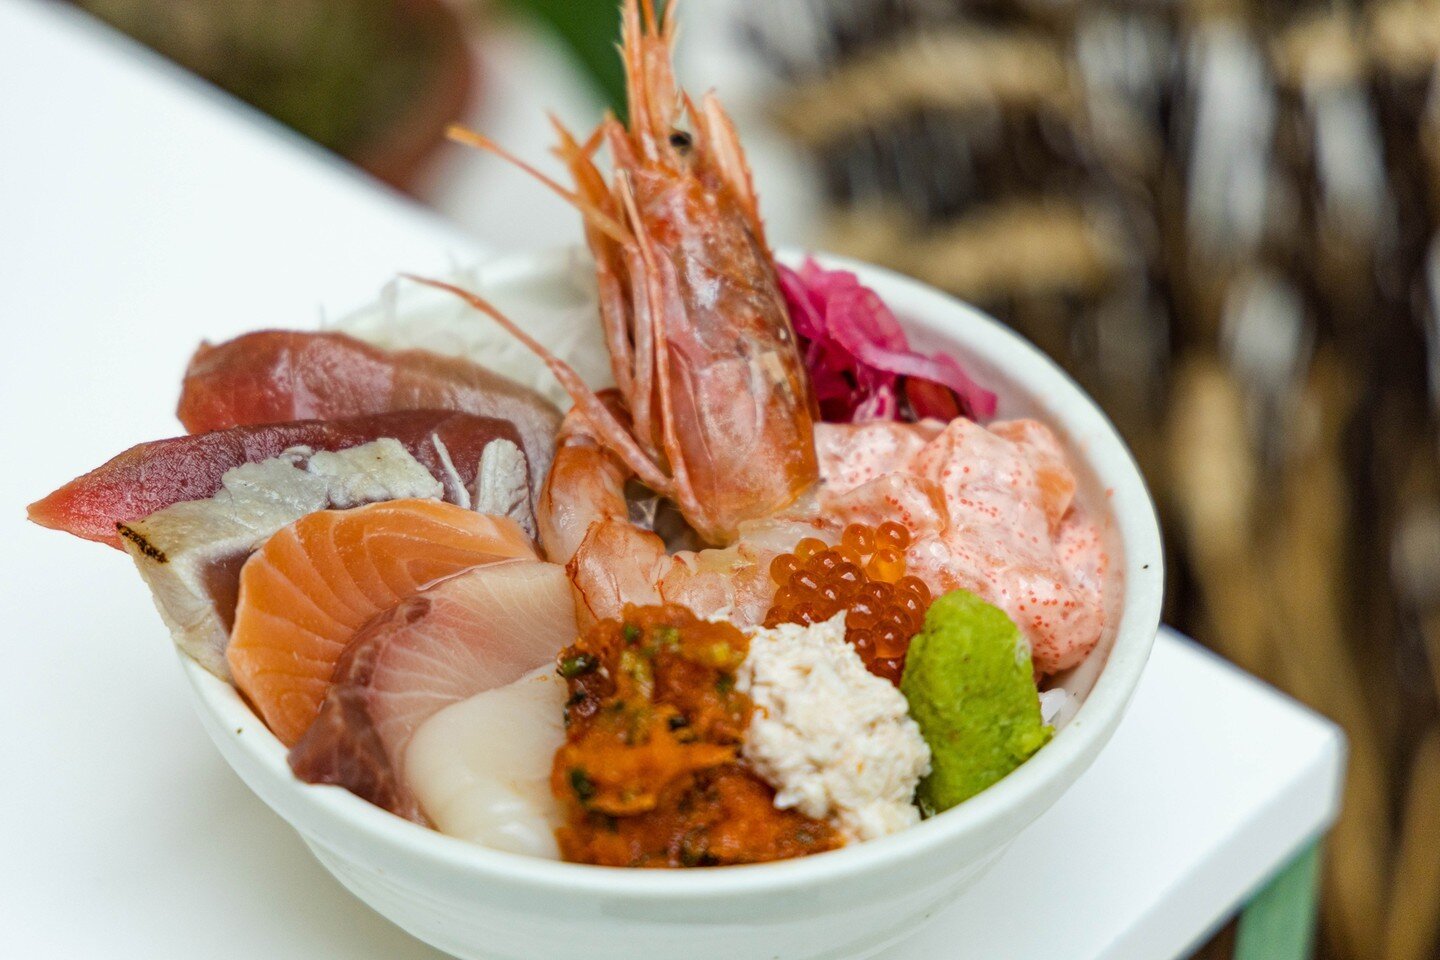 A Jewel exclusive 💎 Jewel Kaisen Chirashi. Fresh and absolutely tasty! Come have a meal at one of the most beautiful spots in Singapore 😍

 #sgfoodies #sgdining #sgrestaurants #japanesefood #chirashi #kaisen #jewel